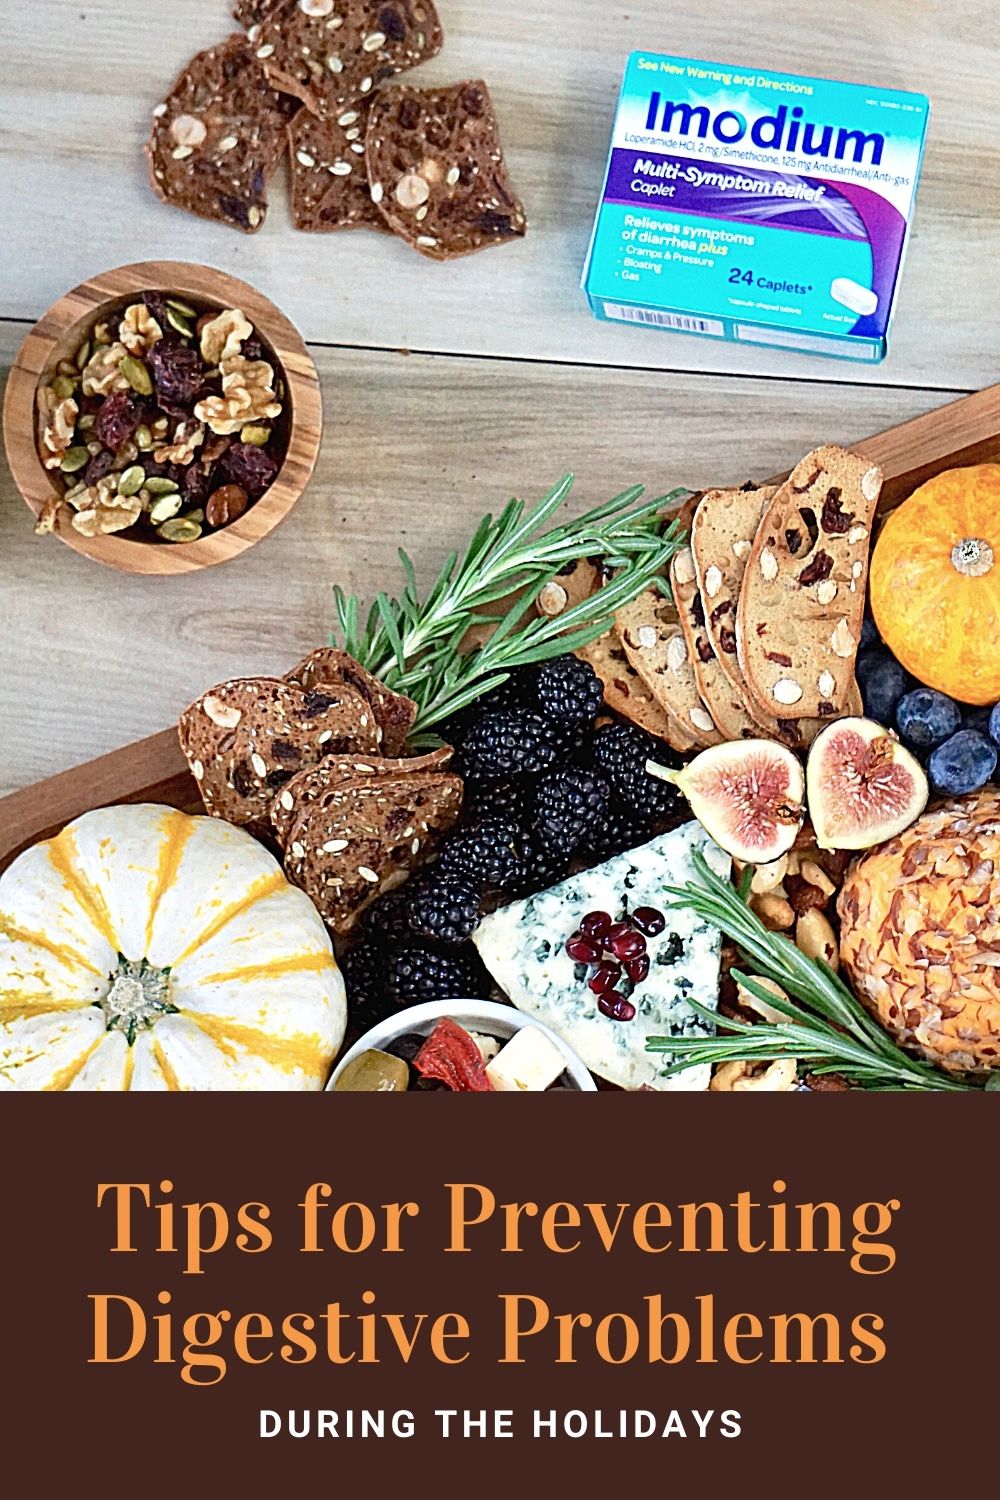 Tips for preventing digestive problems during the holidays